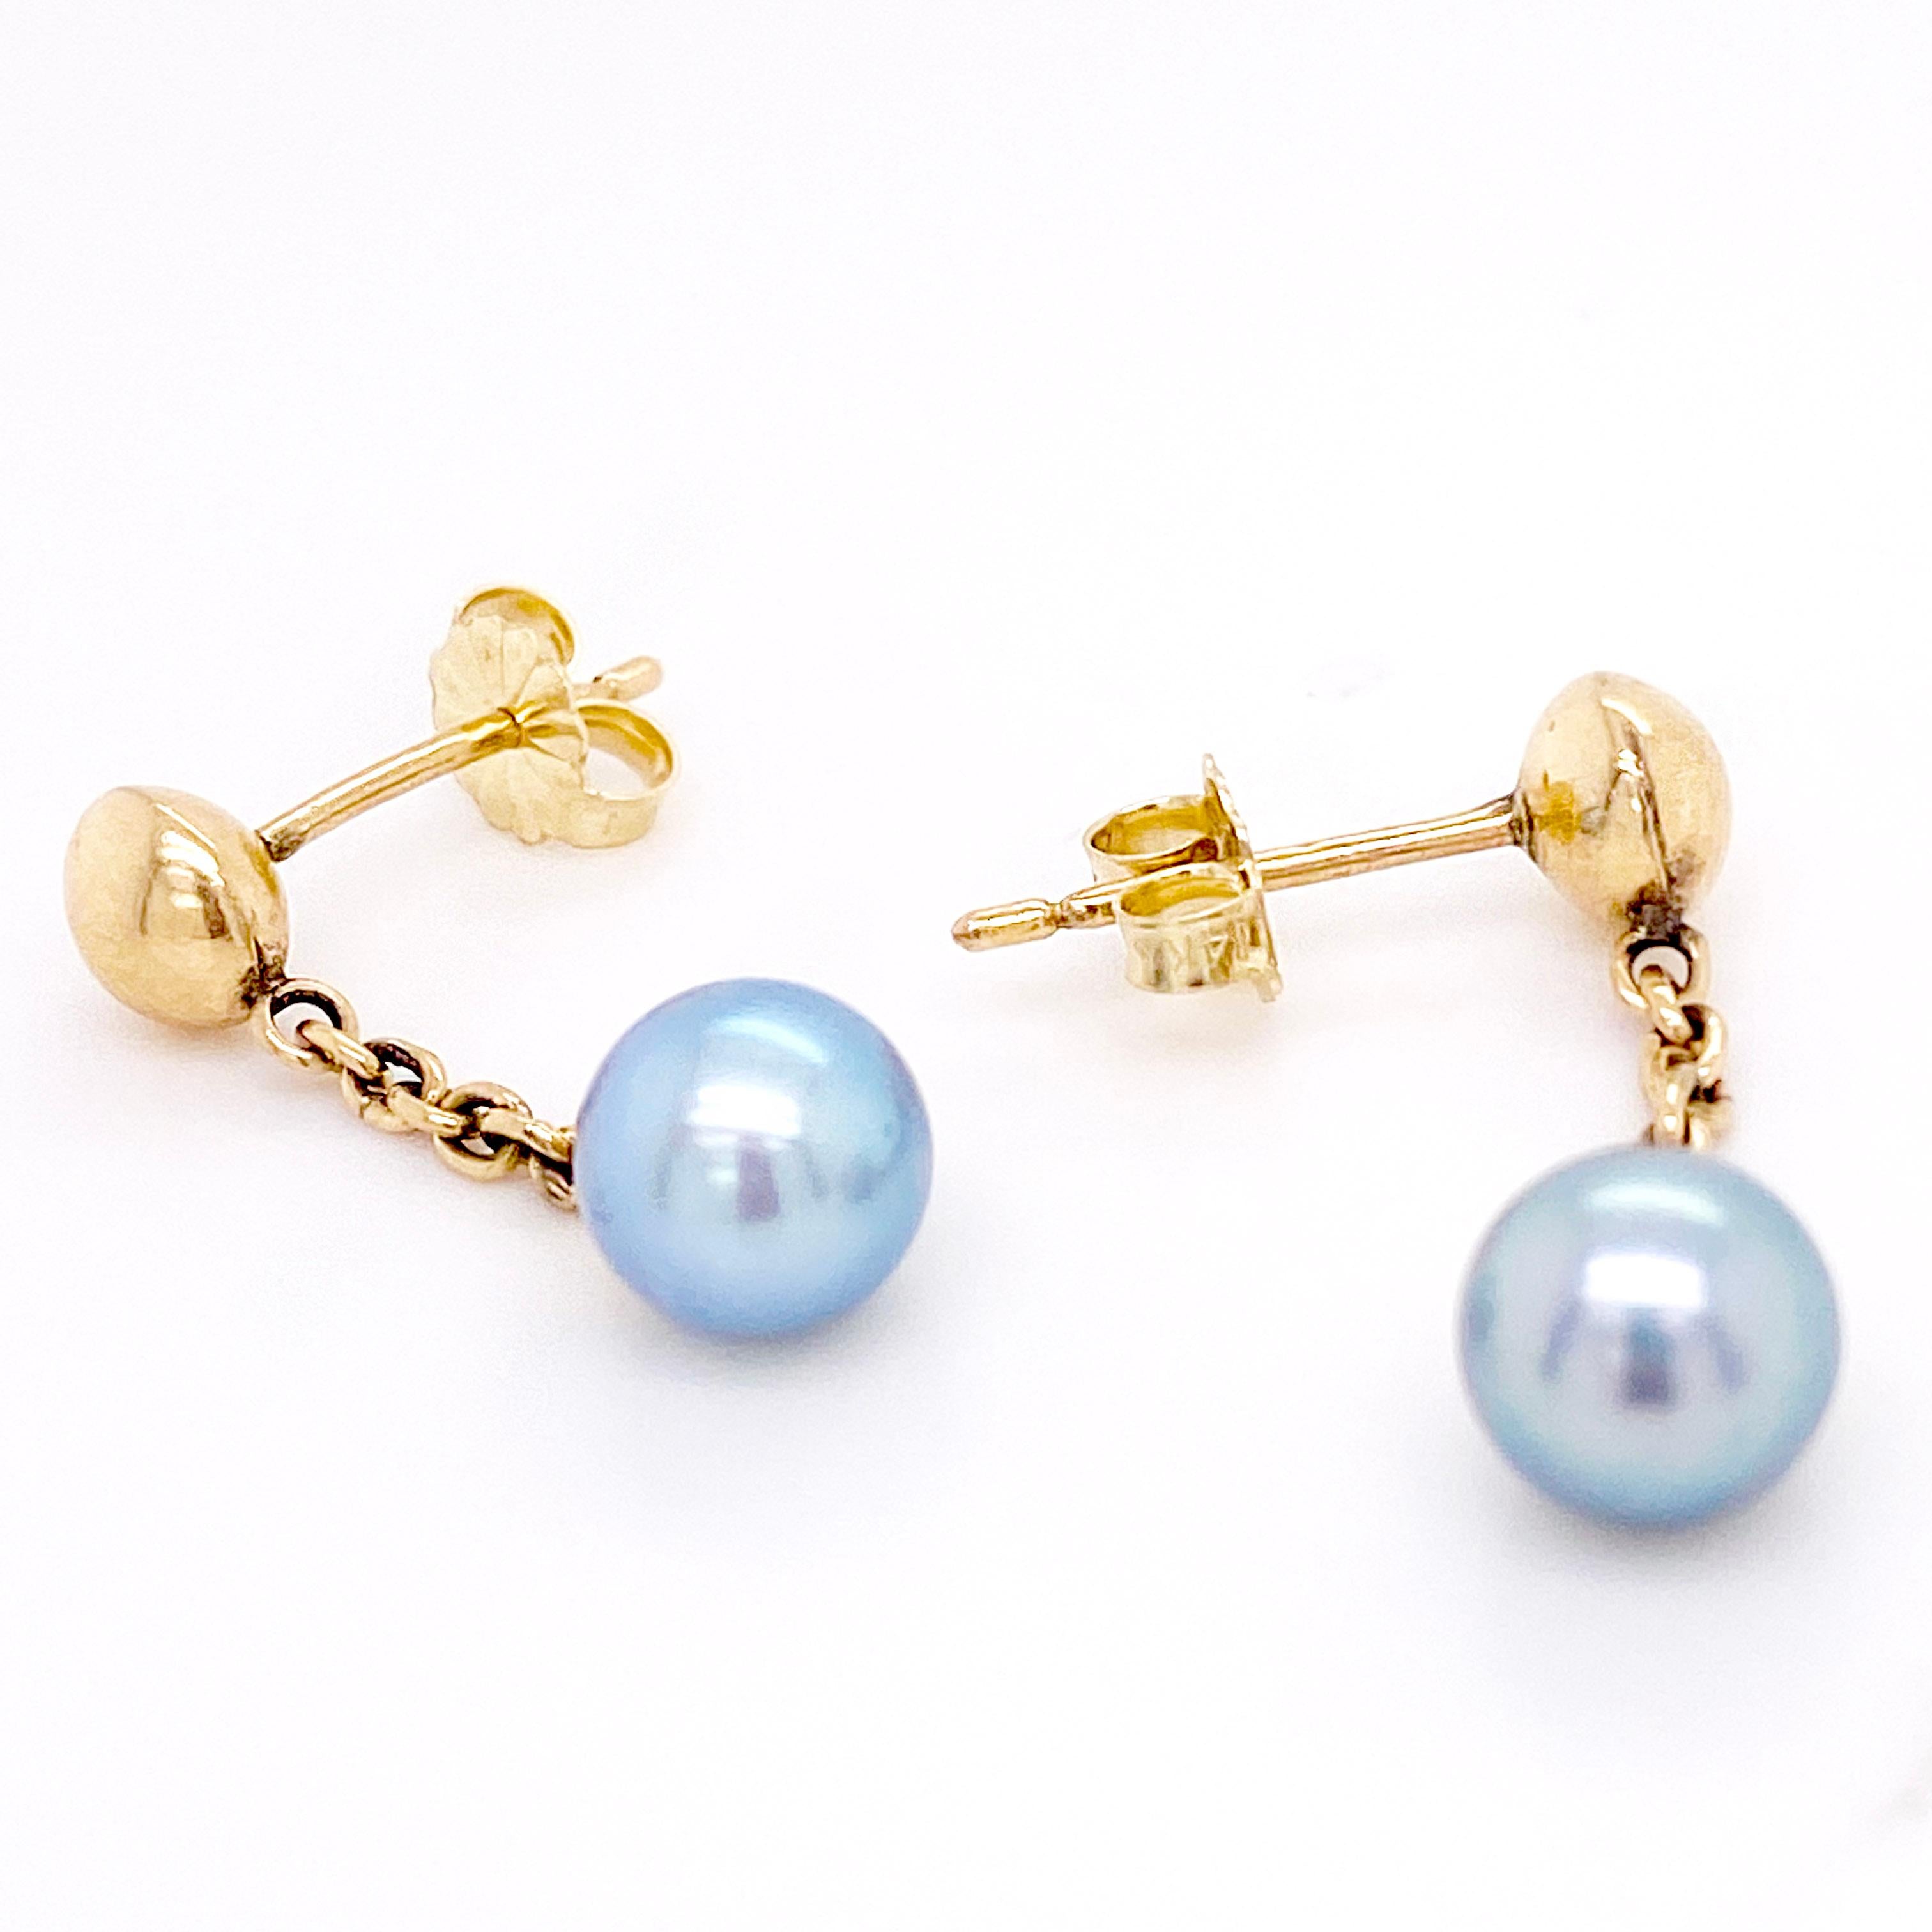 These gorgeous gray pearl earrings are perfect for anyone! They are genuine cultured pearls that have a lovely luster and orient. The post ad links are solid 14 karat yellow gold and the ball post is 6.5 millimeters. These earrings can dress up or